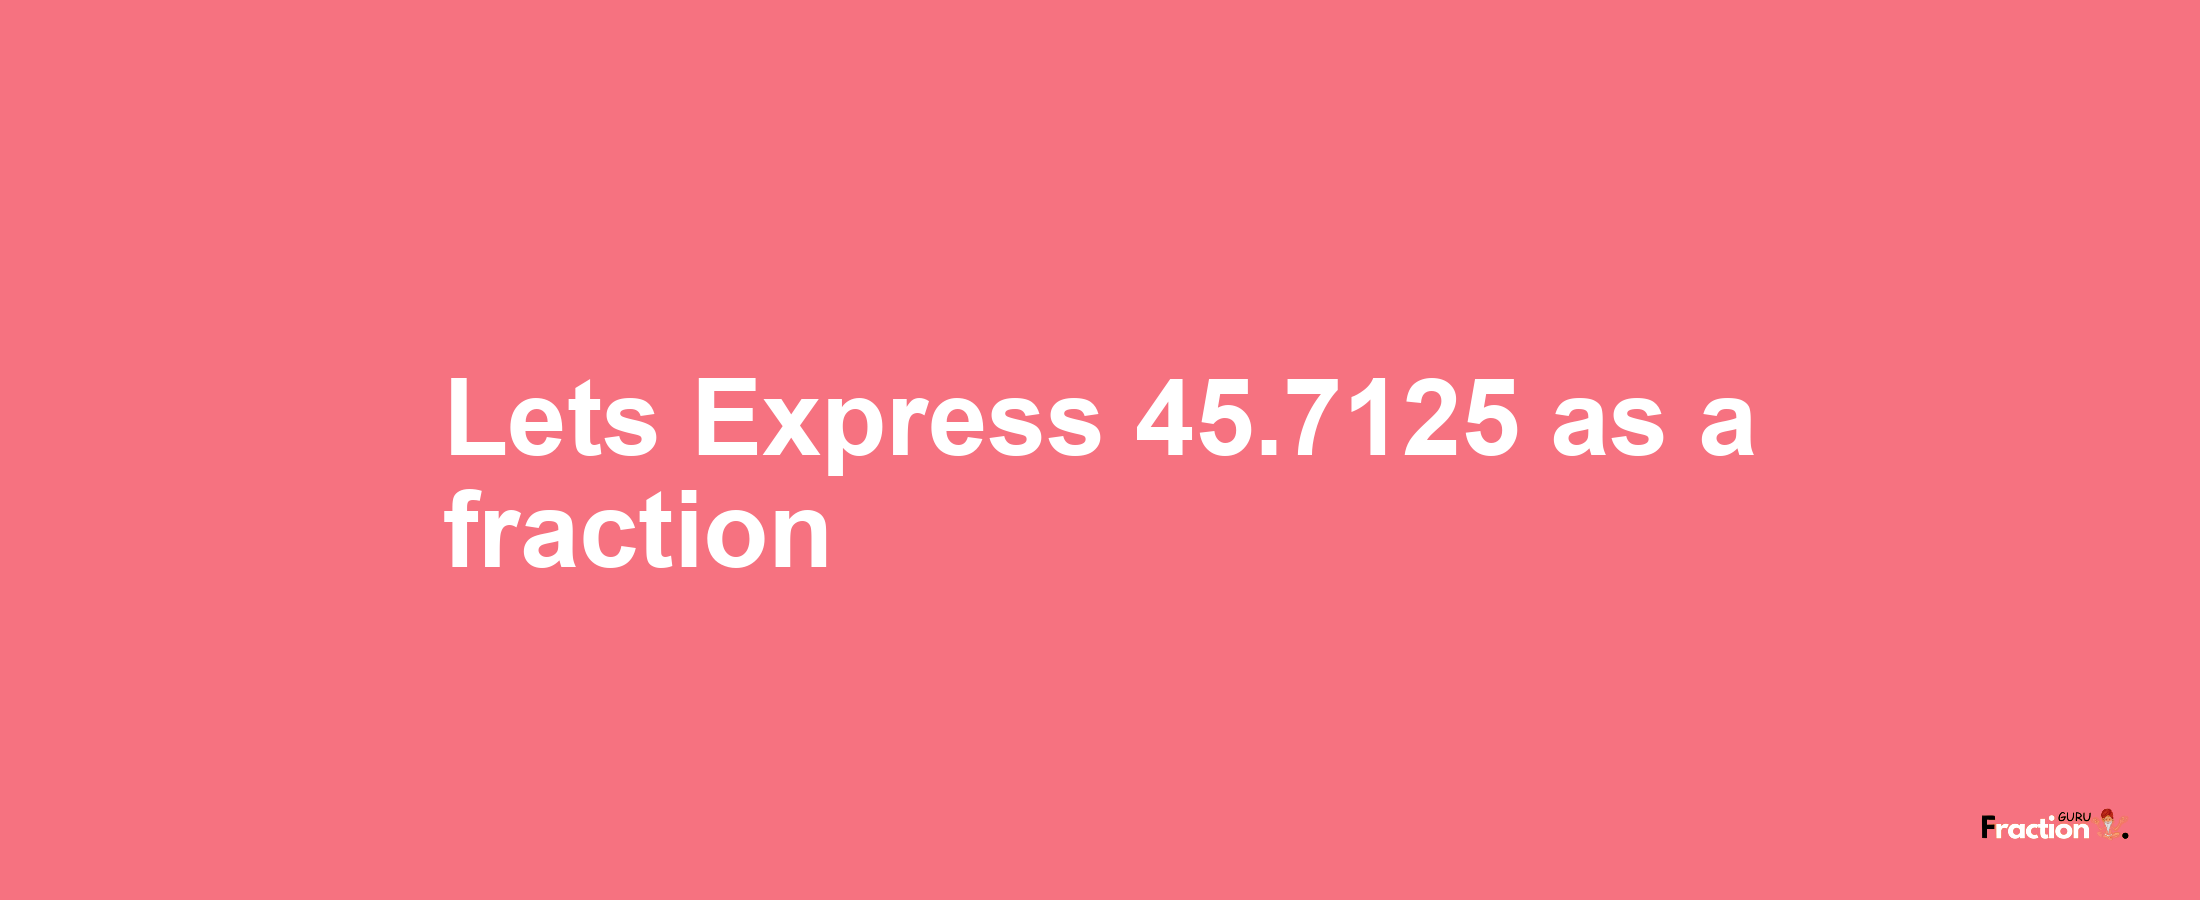 Lets Express 45.7125 as afraction